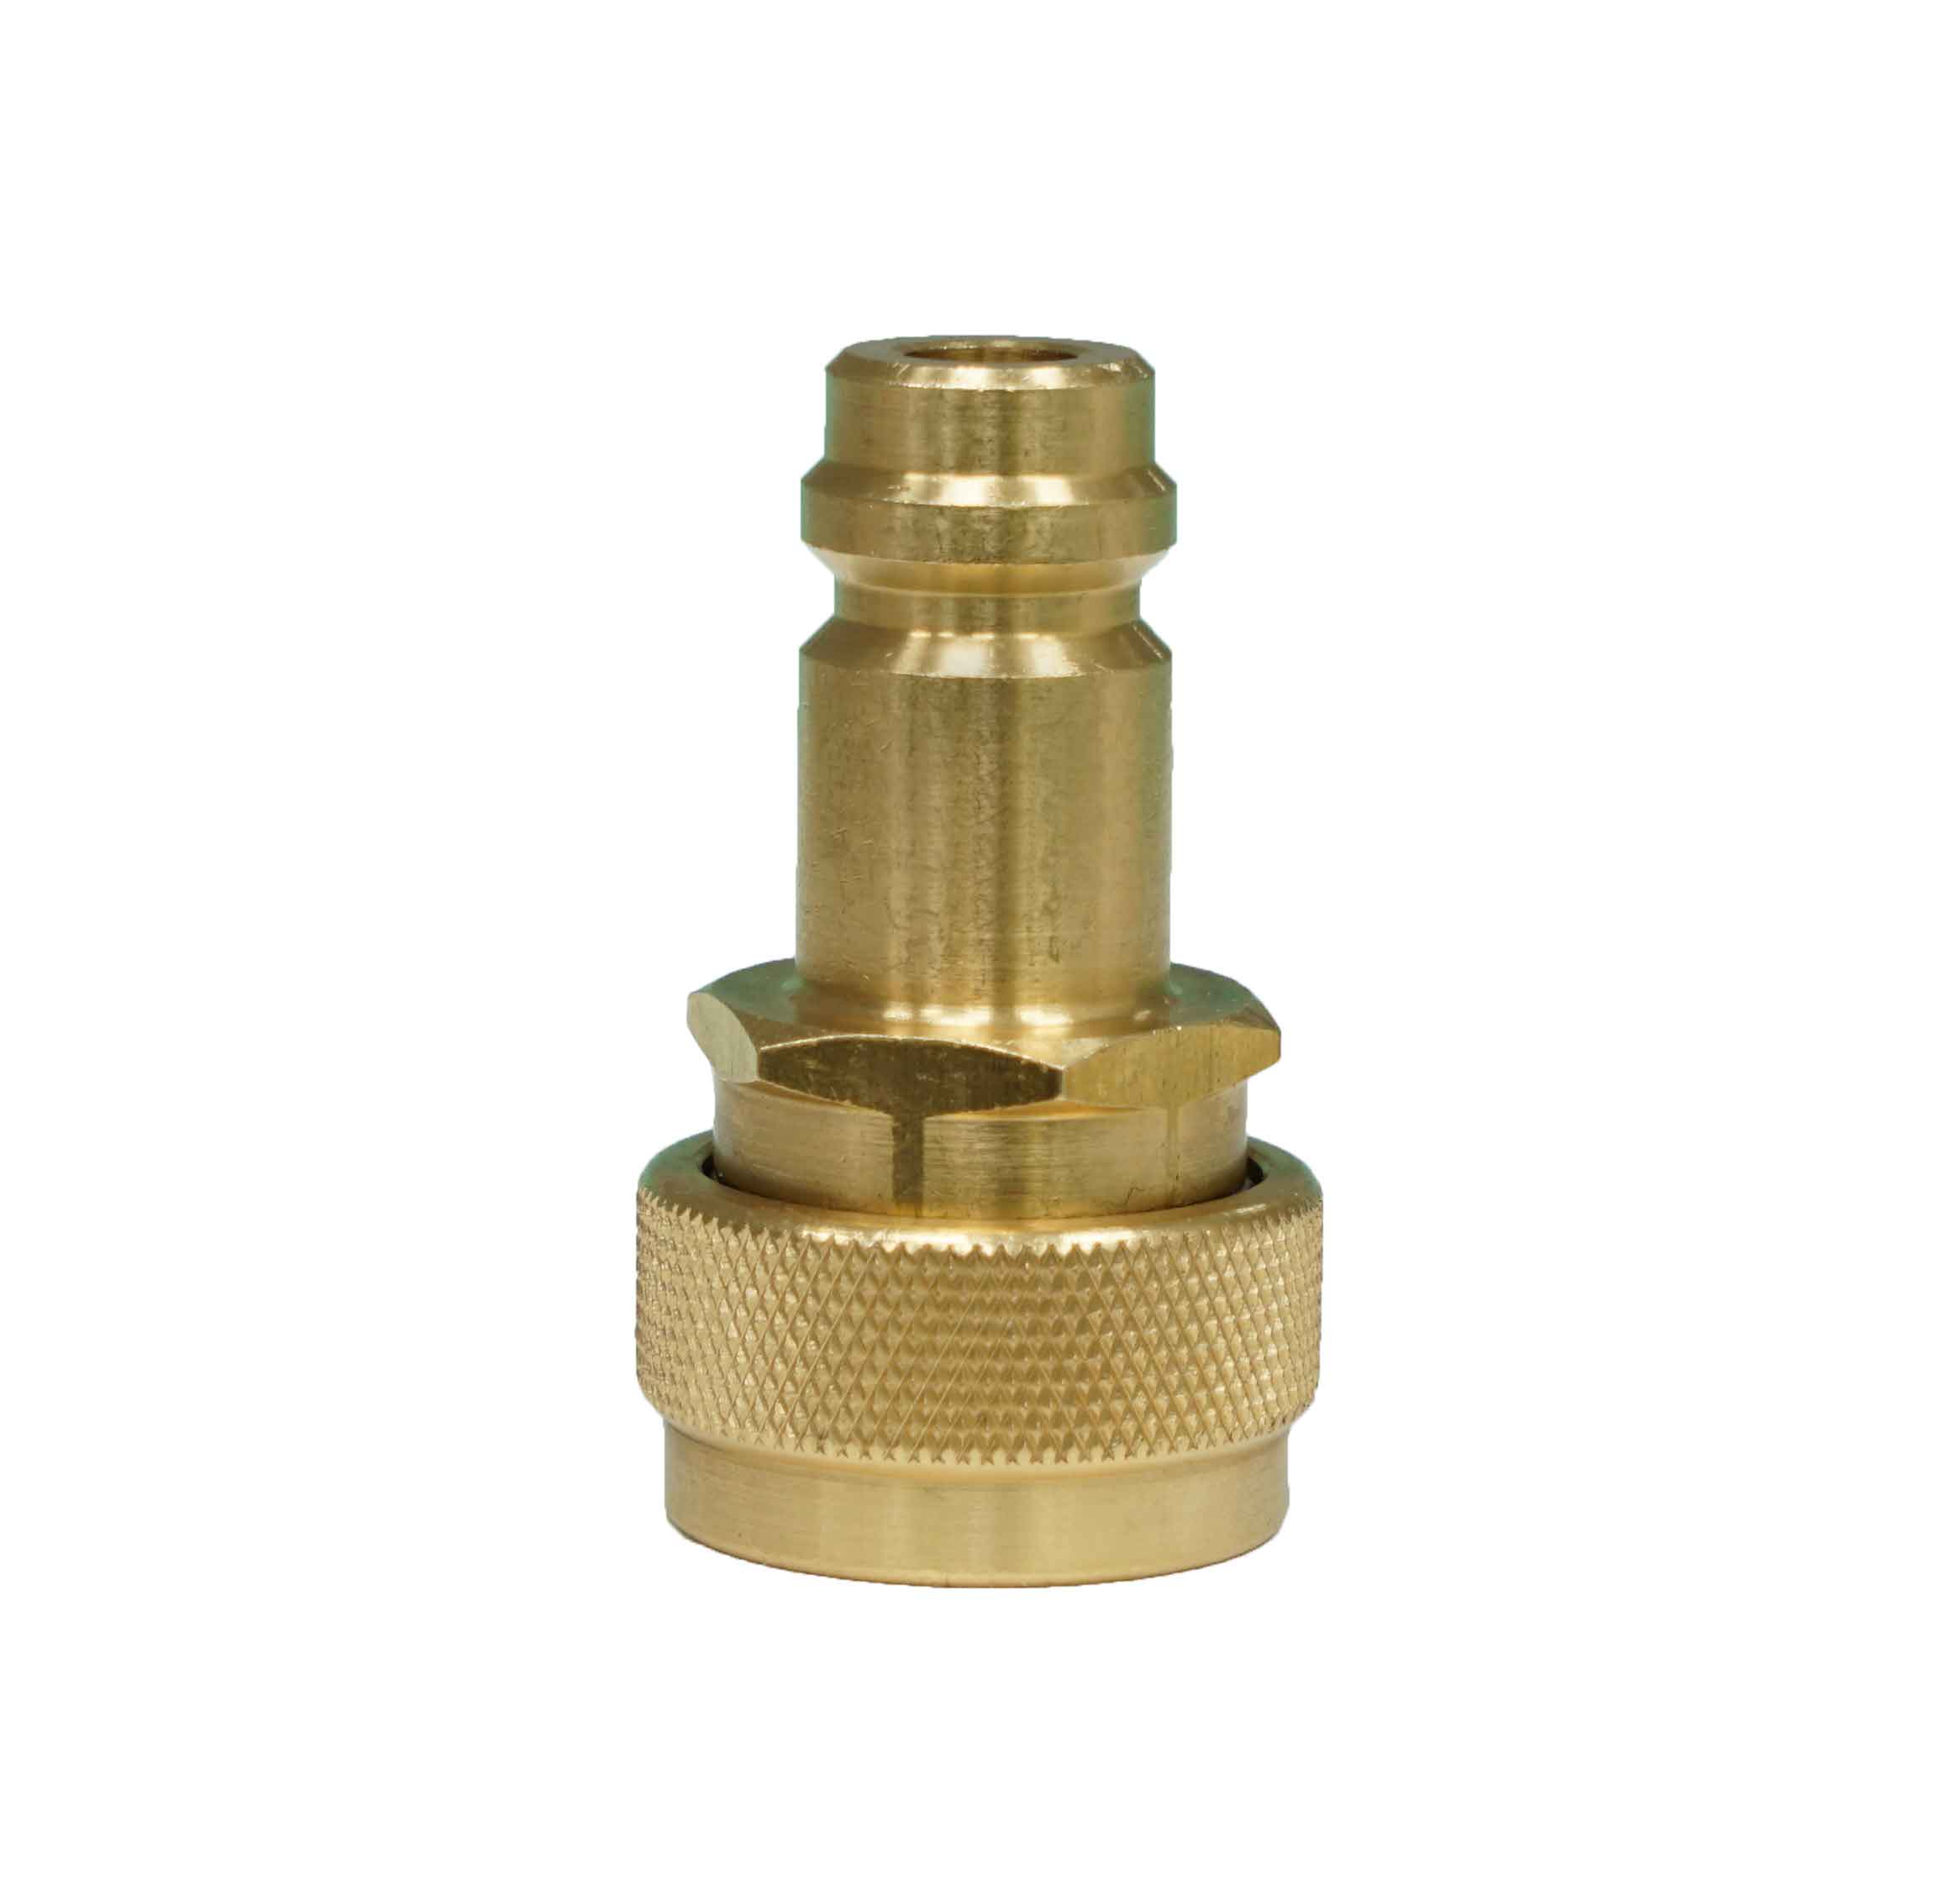 50552-H - R1234yf-female-coupler-to-R134a-male-coupler-w-STD-valve-core-high-side